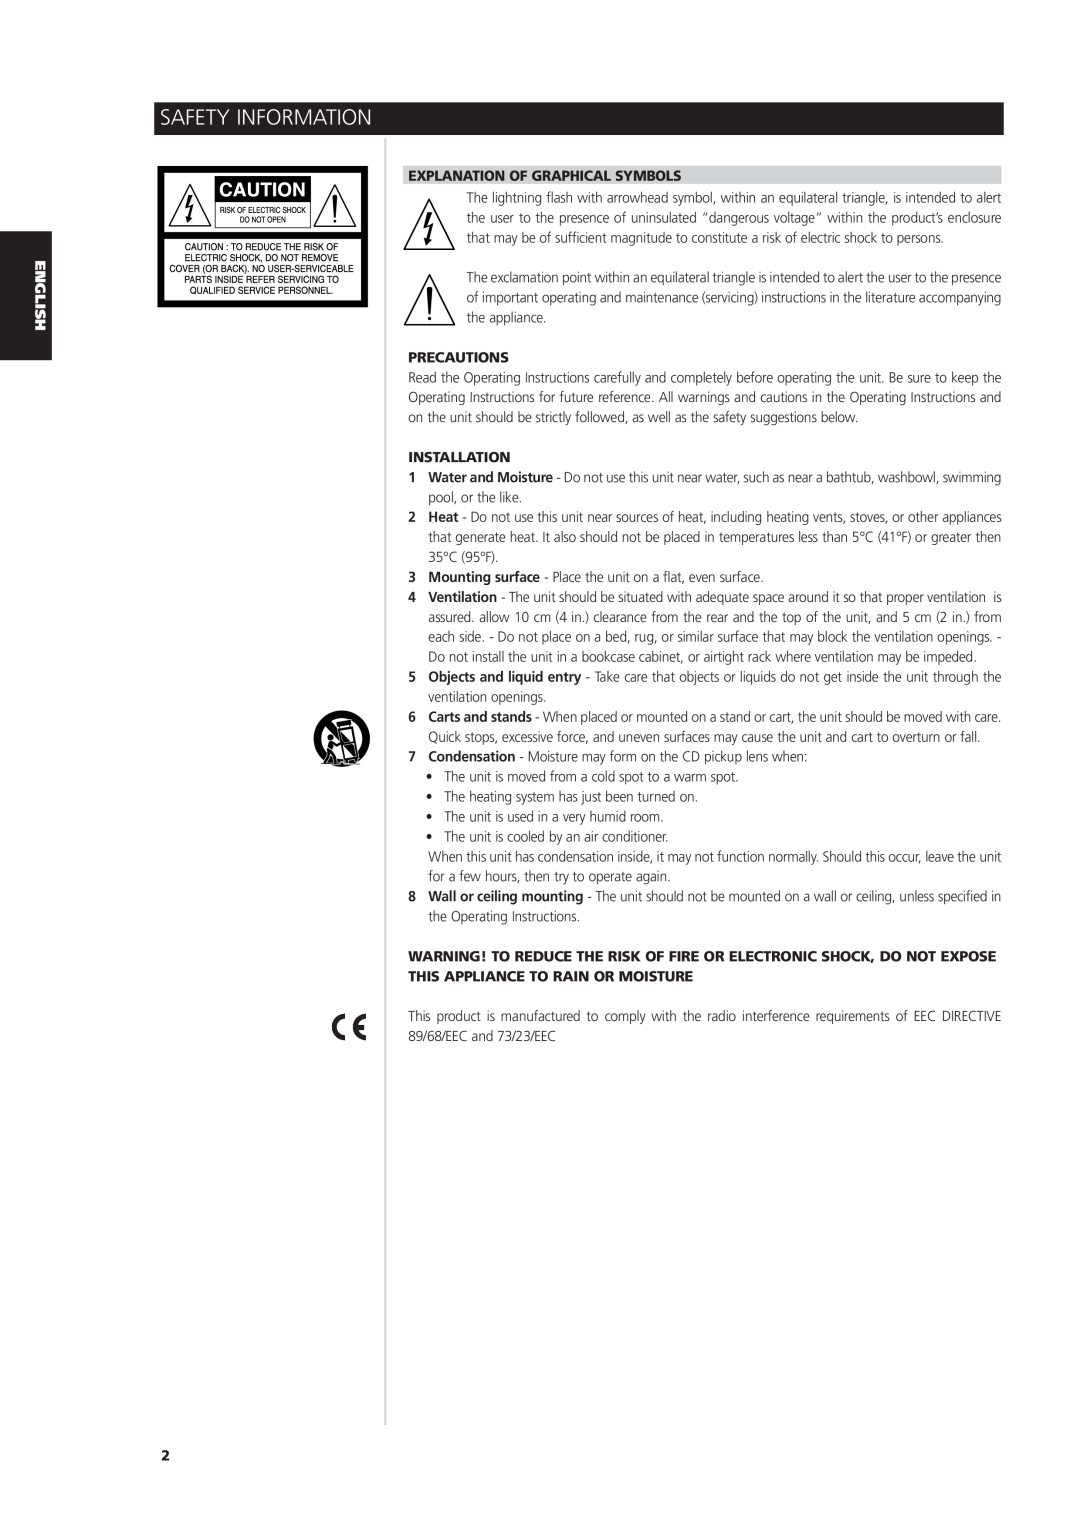 NAD S170iAV owner manual Safety Information, Explanation Of Graphical Symbols, Precautions, Installation 